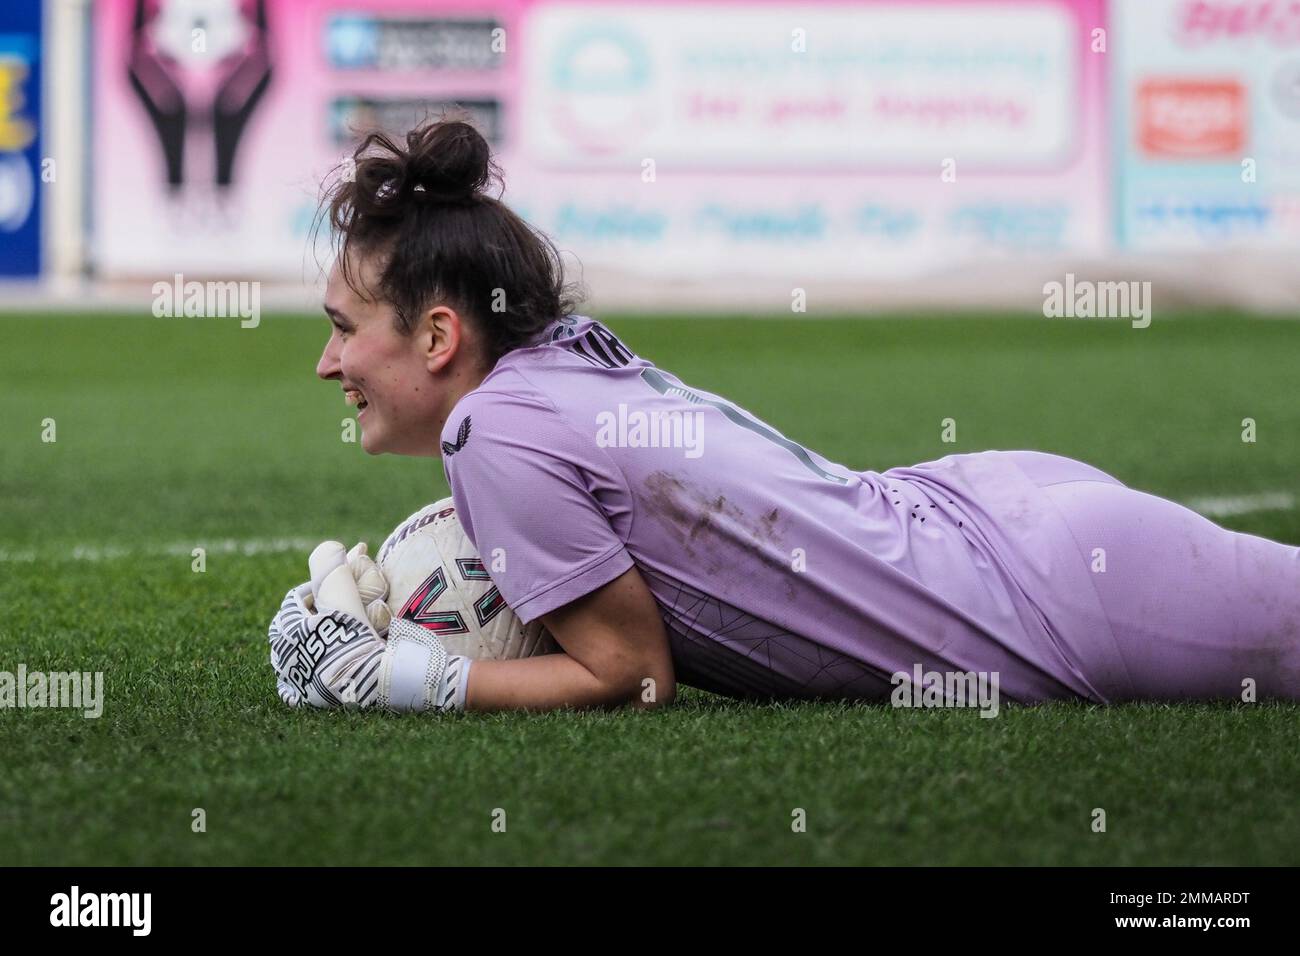 Telford, UK. 29th Jan, 2023. Telford, England, January 29th 2023: Goalkeeper Shan Turner (1 Wolverhampton Wanderers) holds on to the ball during the Womens FA Cup game between Wolverhampton Wanderers and West Ham United at New Bucks Head in Telford, England (Natalie Mincher/SPP) Credit: SPP Sport Press Photo. /Alamy Live News Stock Photo